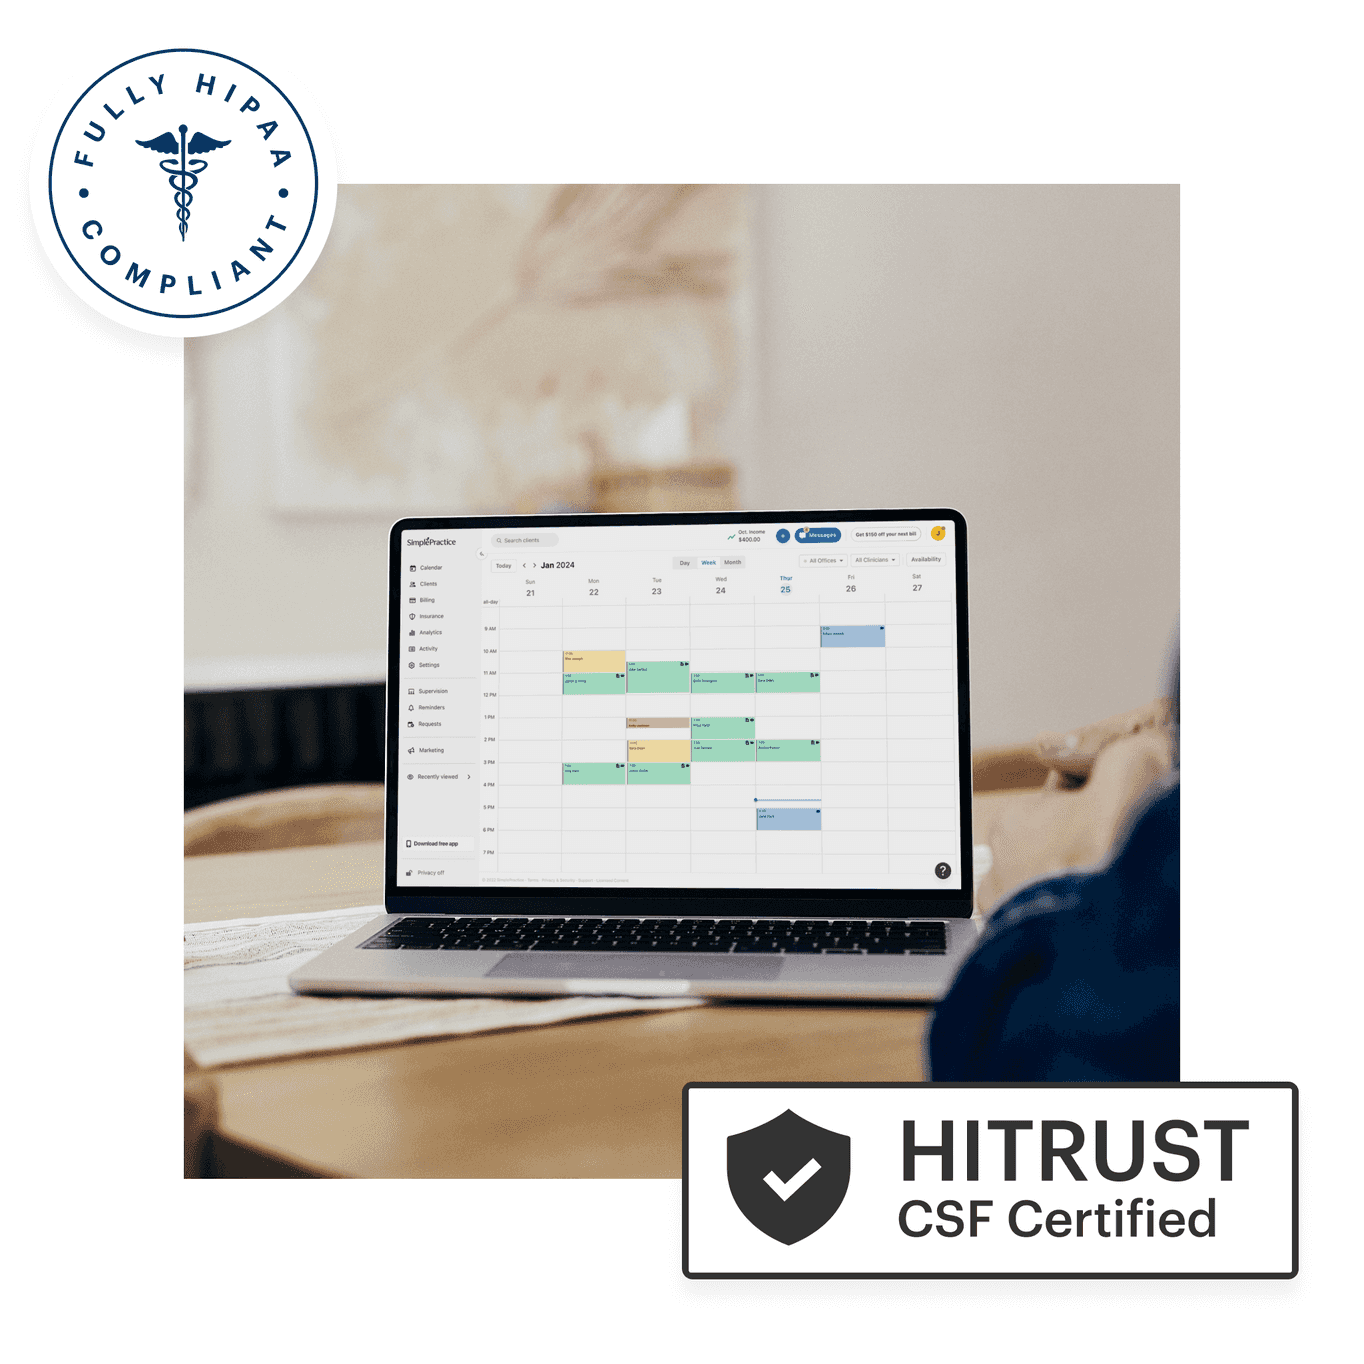 Laptop displaying SimplePractice, superimposed with logos reading "Fully HIPAA compliant" and "HITRUST CSF Certified"